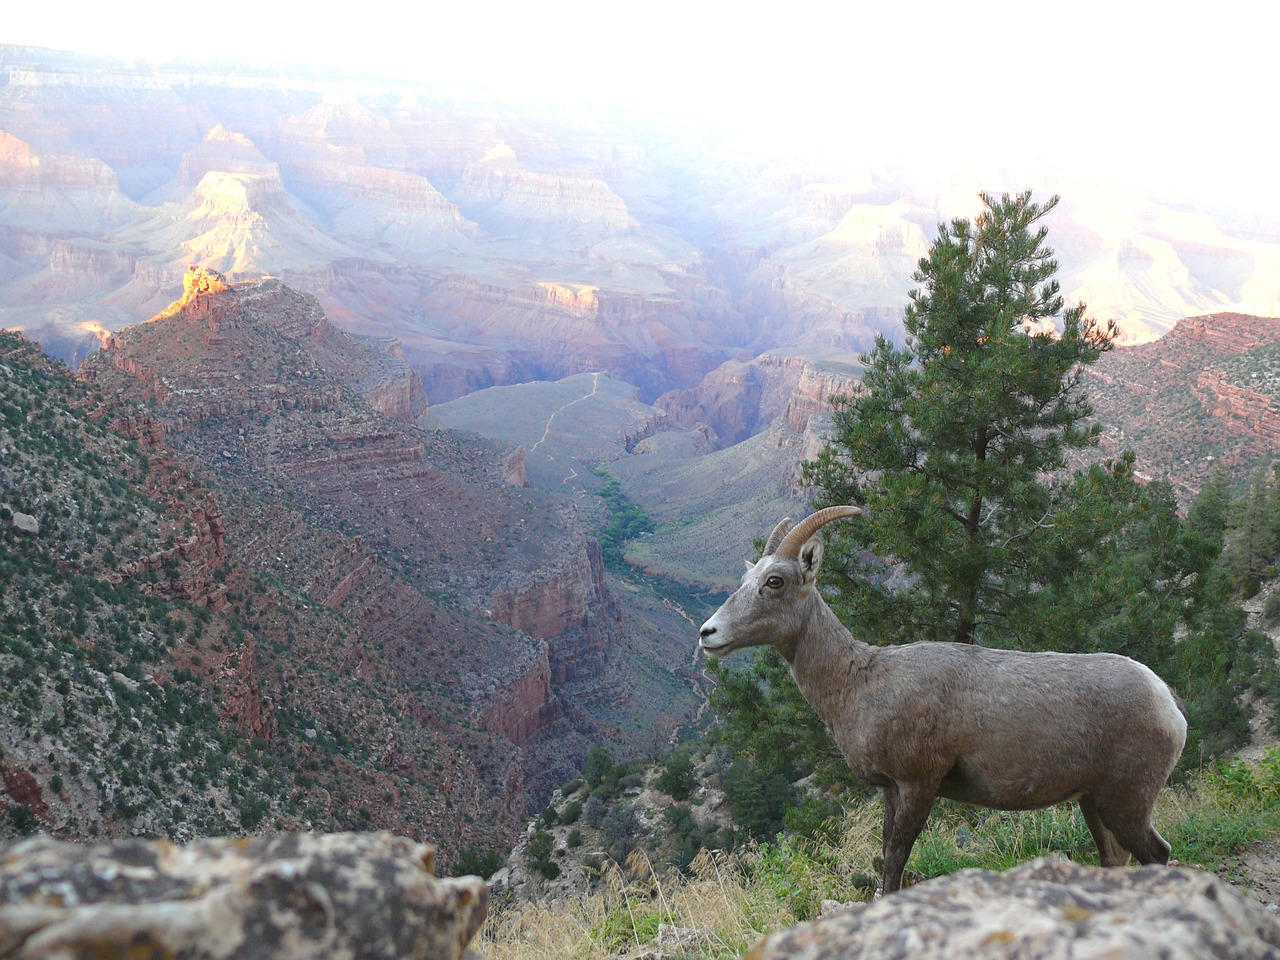 Mountain sheep navigates a slope overlooking the Grand Canyon.